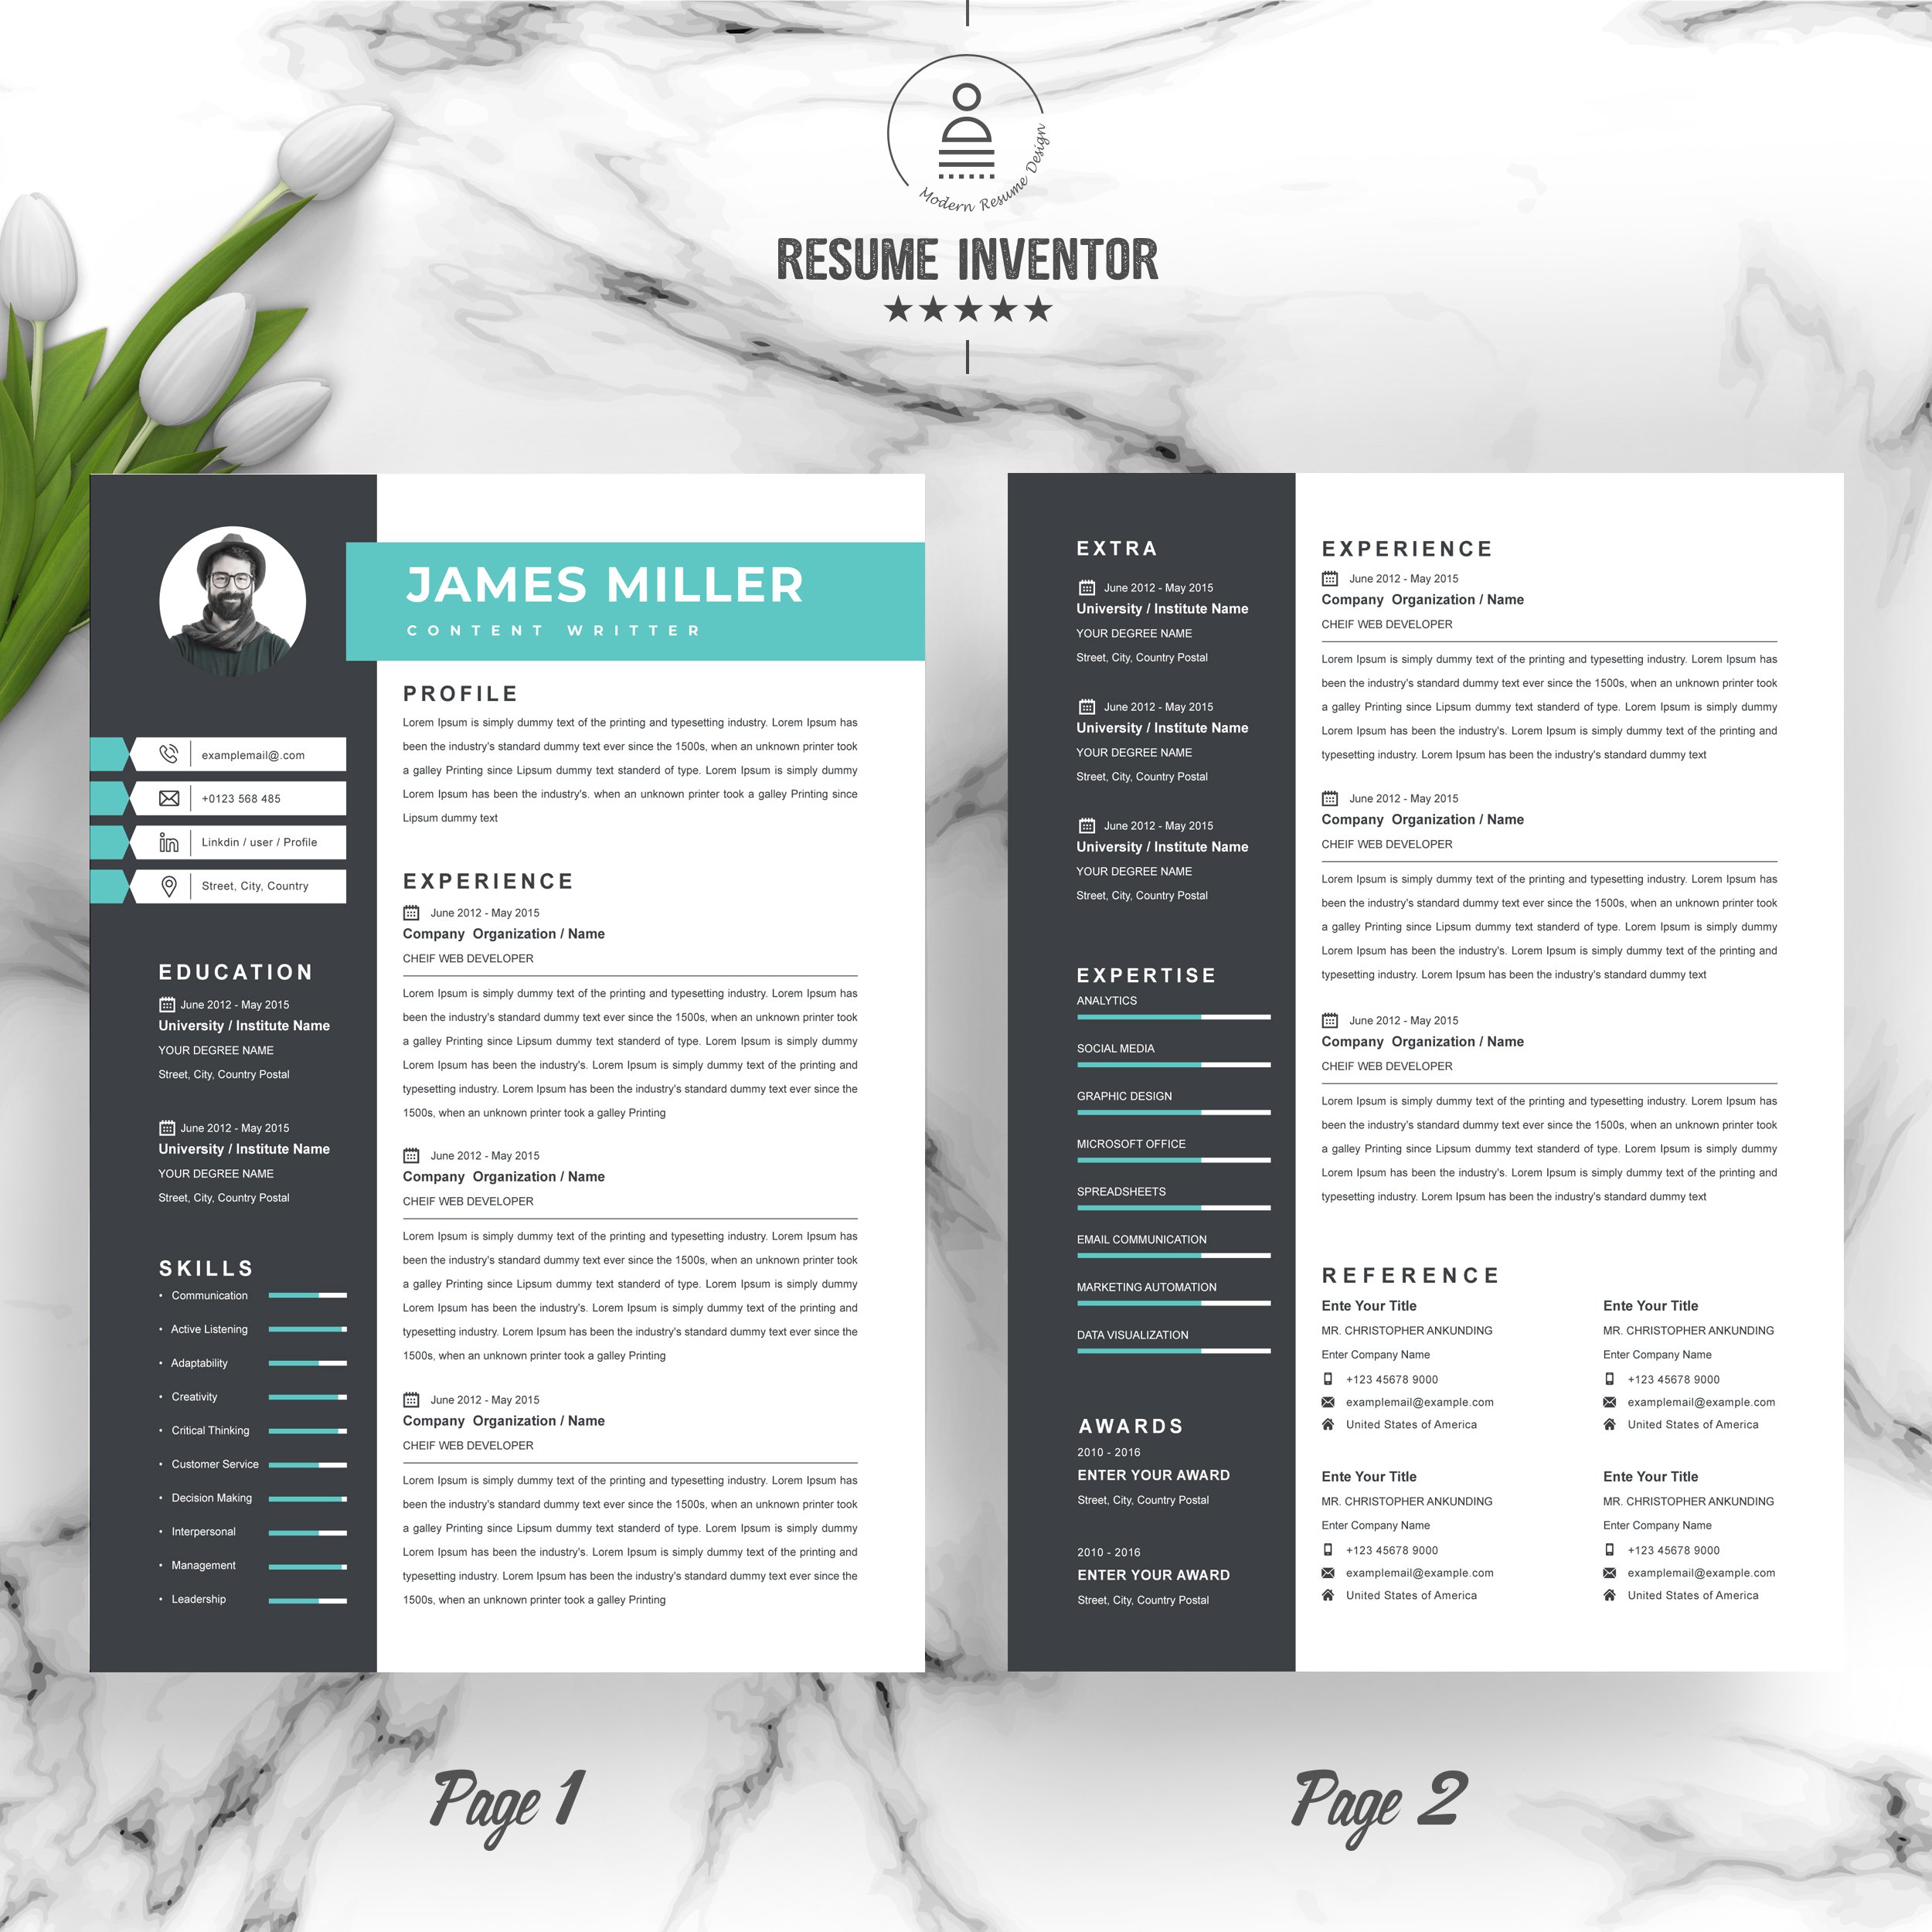 Content Writer Resume Template preview image.